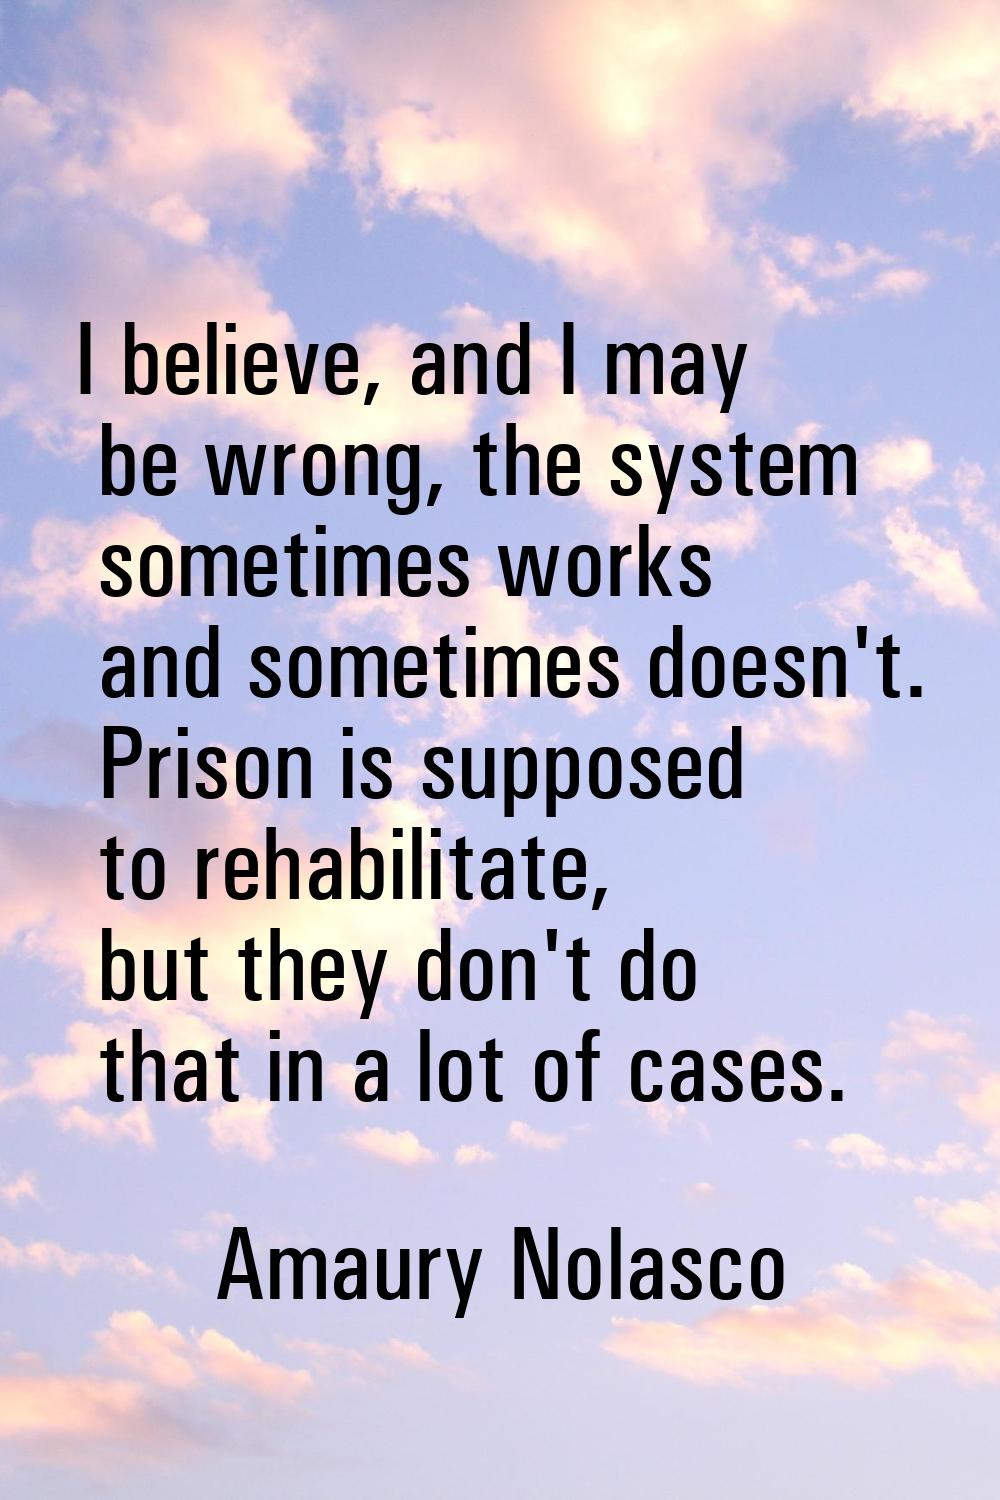 I believe, and I may be wrong, the system sometimes works and sometimes doesn't. Prison is supposed